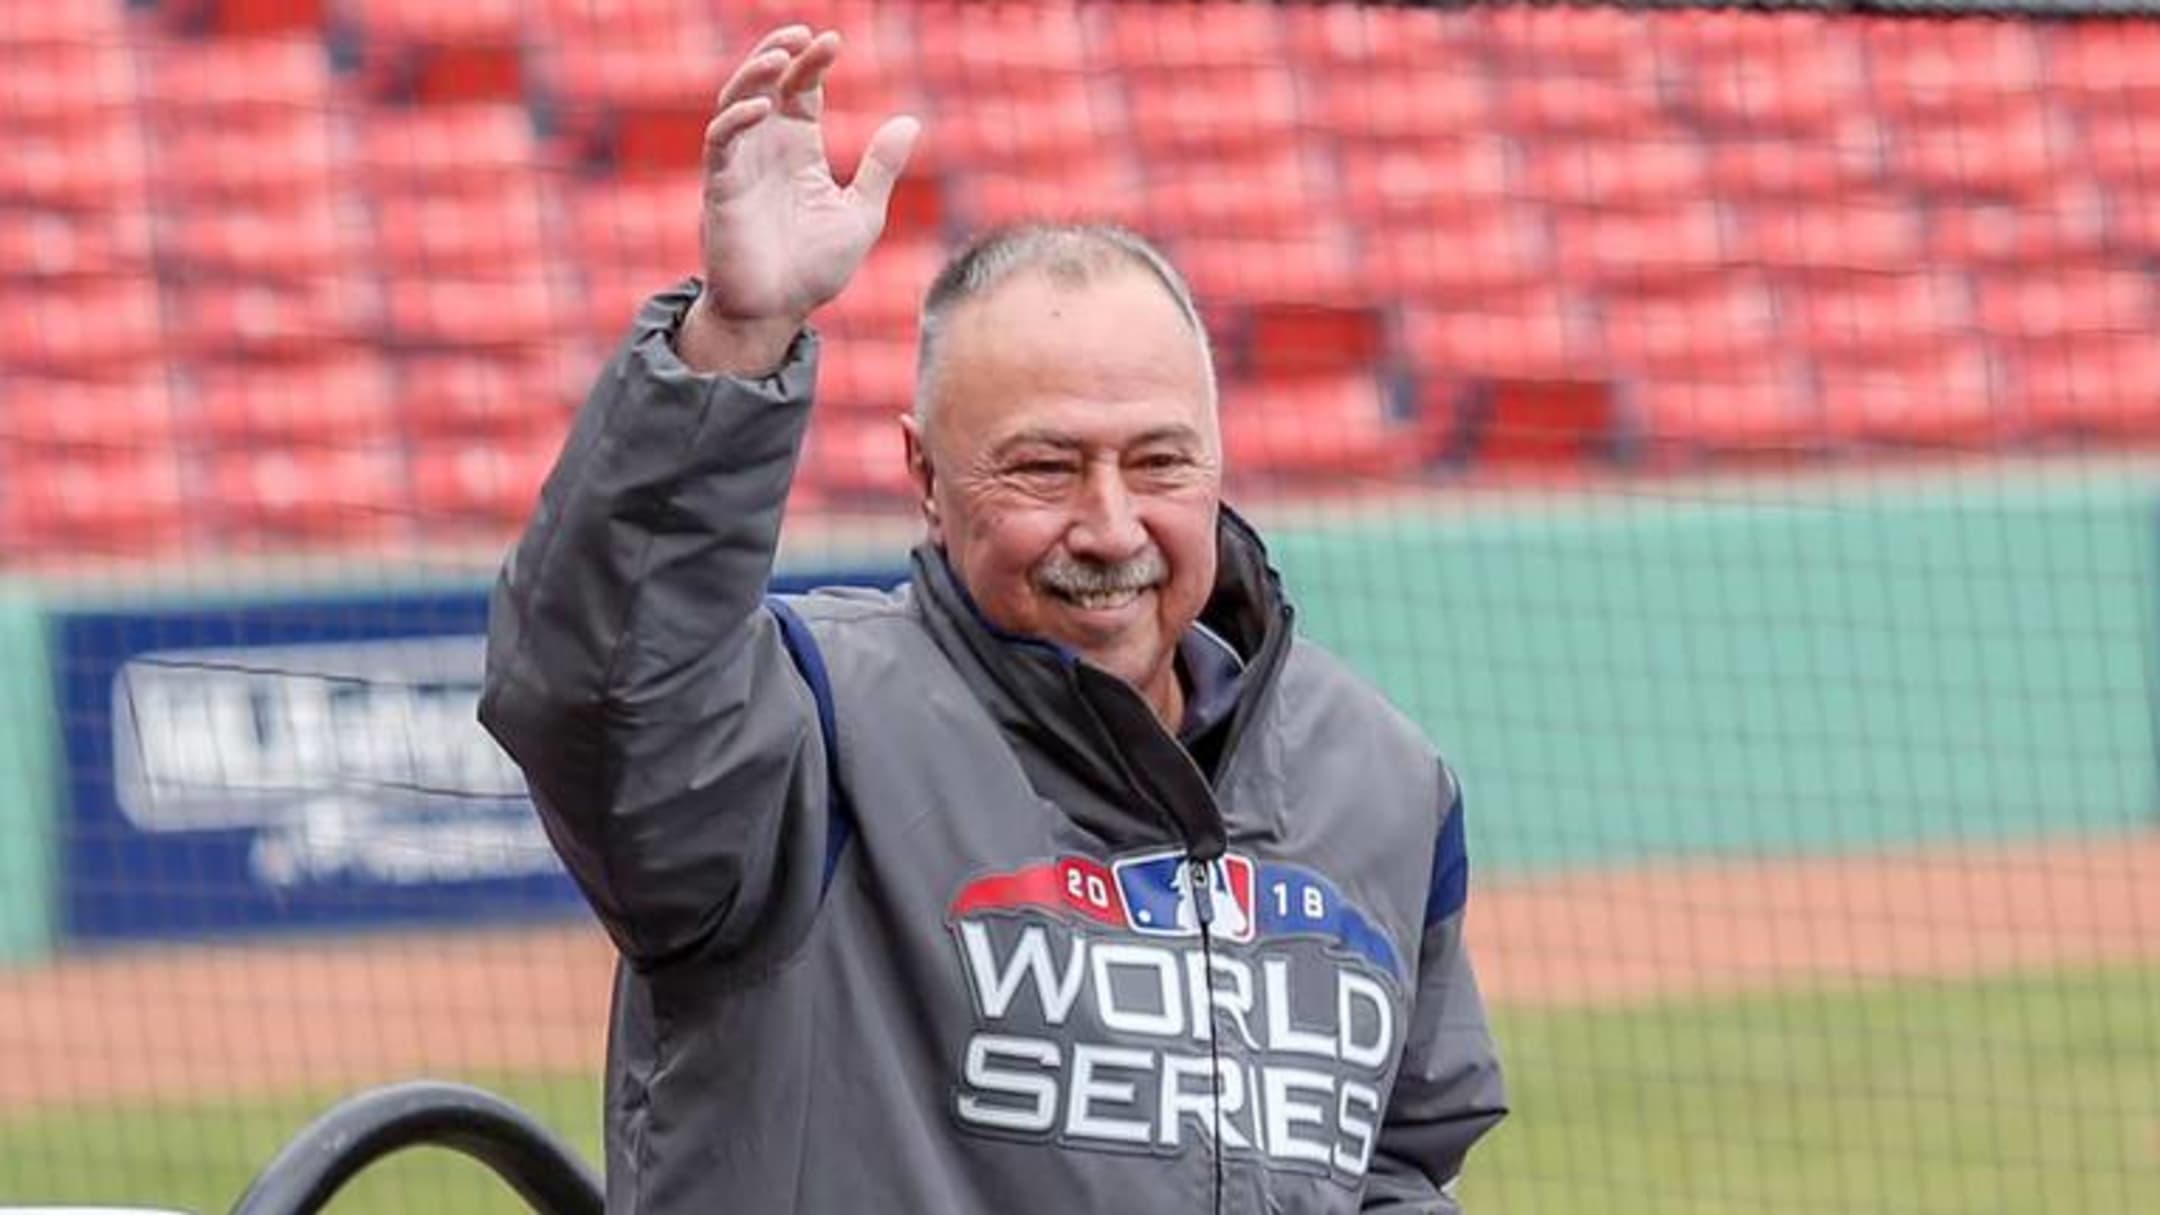 Longtime Red Sox broadcaster Jerry Remy dies at 68